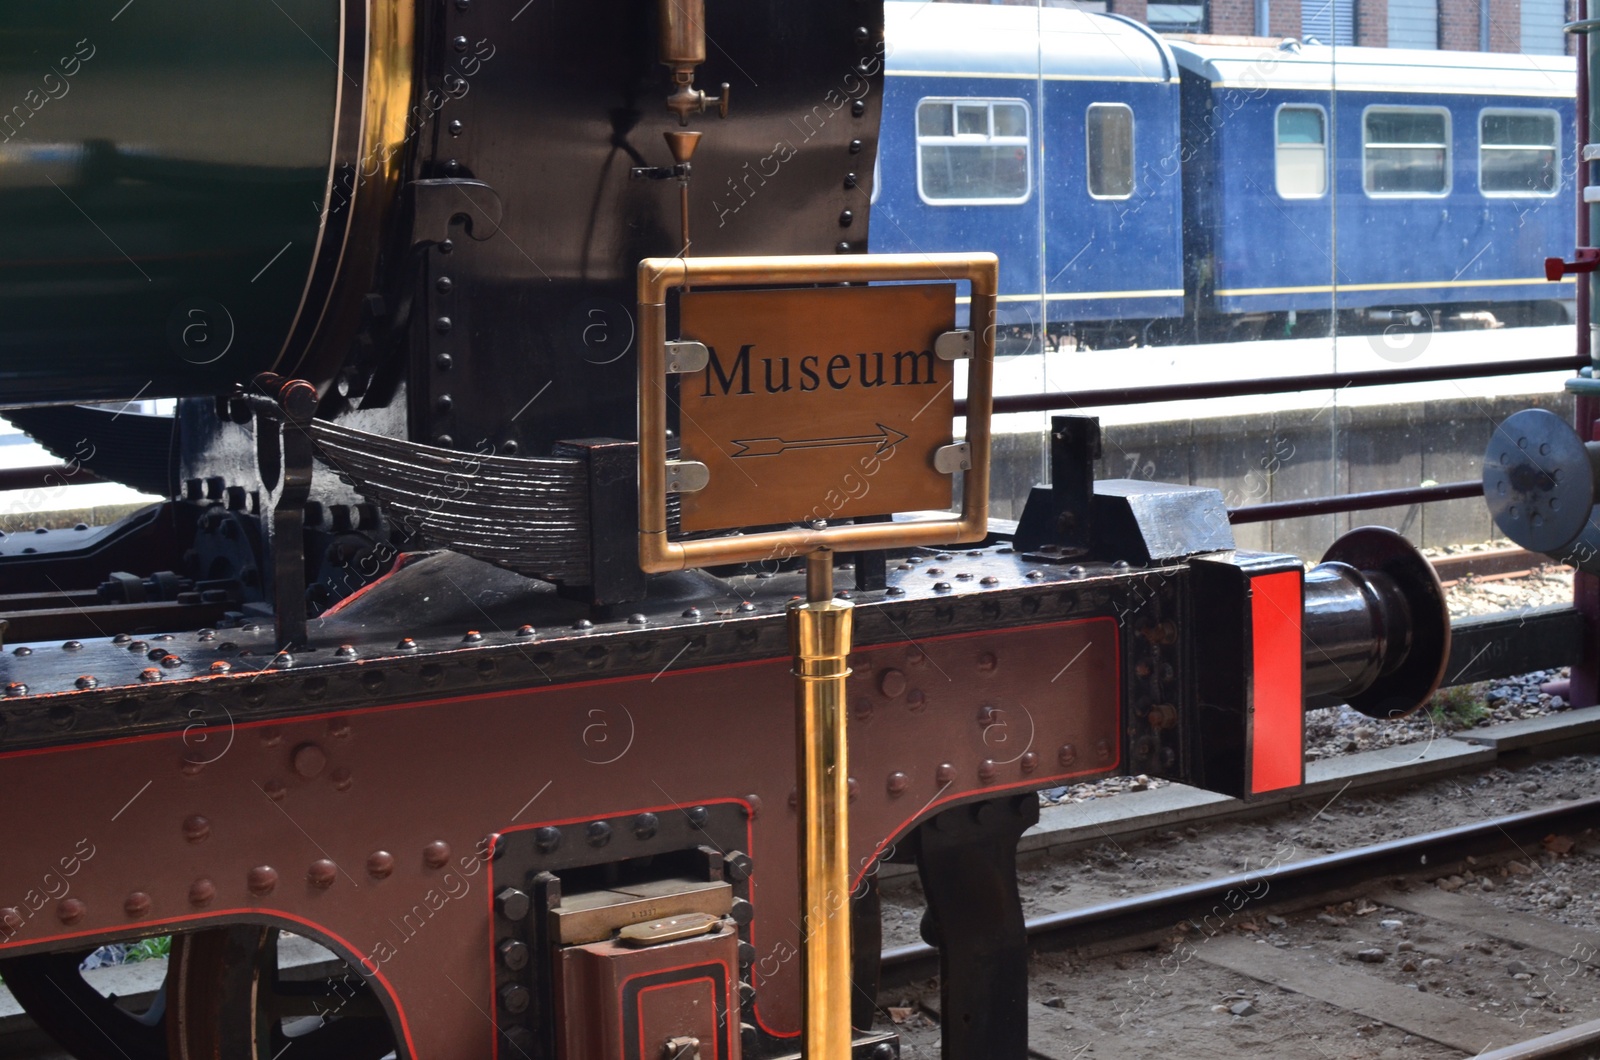 Photo of Utrecht, Netherlands - July 23, 2022: Spoorwegmuseum. Museum sign and arrow at railway station